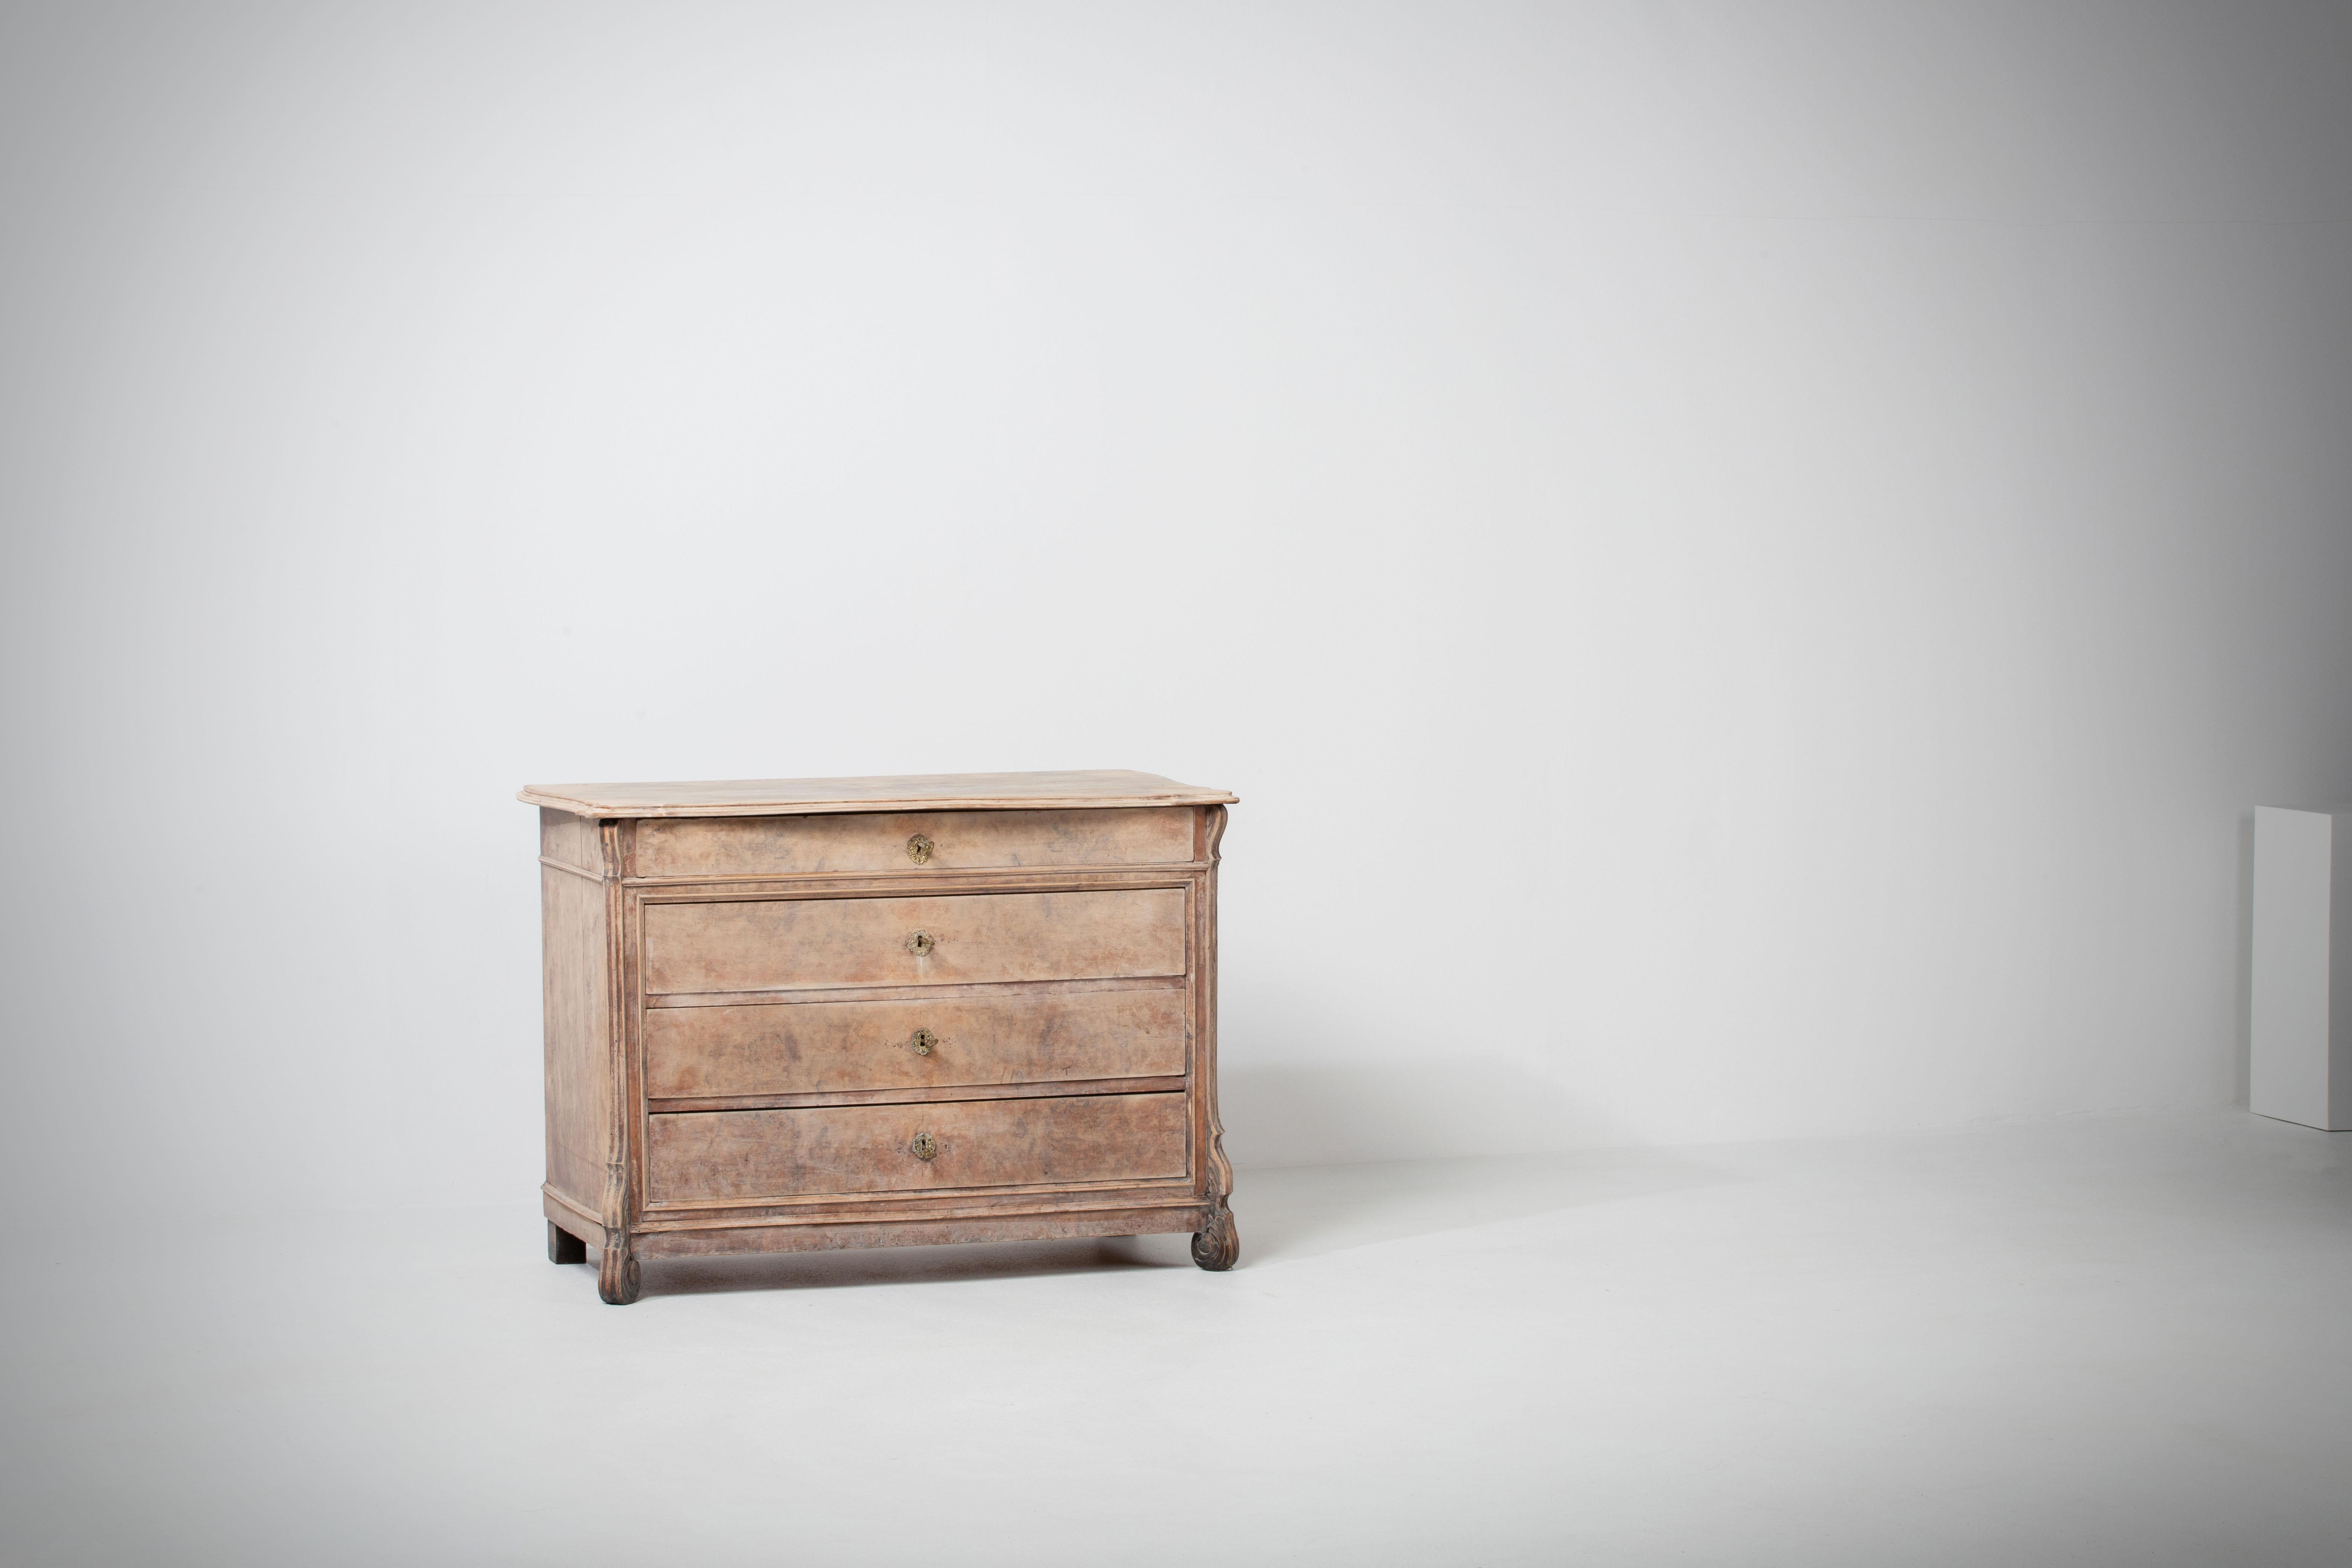 Beautiful French chest from the 19th century.
Losses and traces of wear, a piece steeped in history and full of charm.